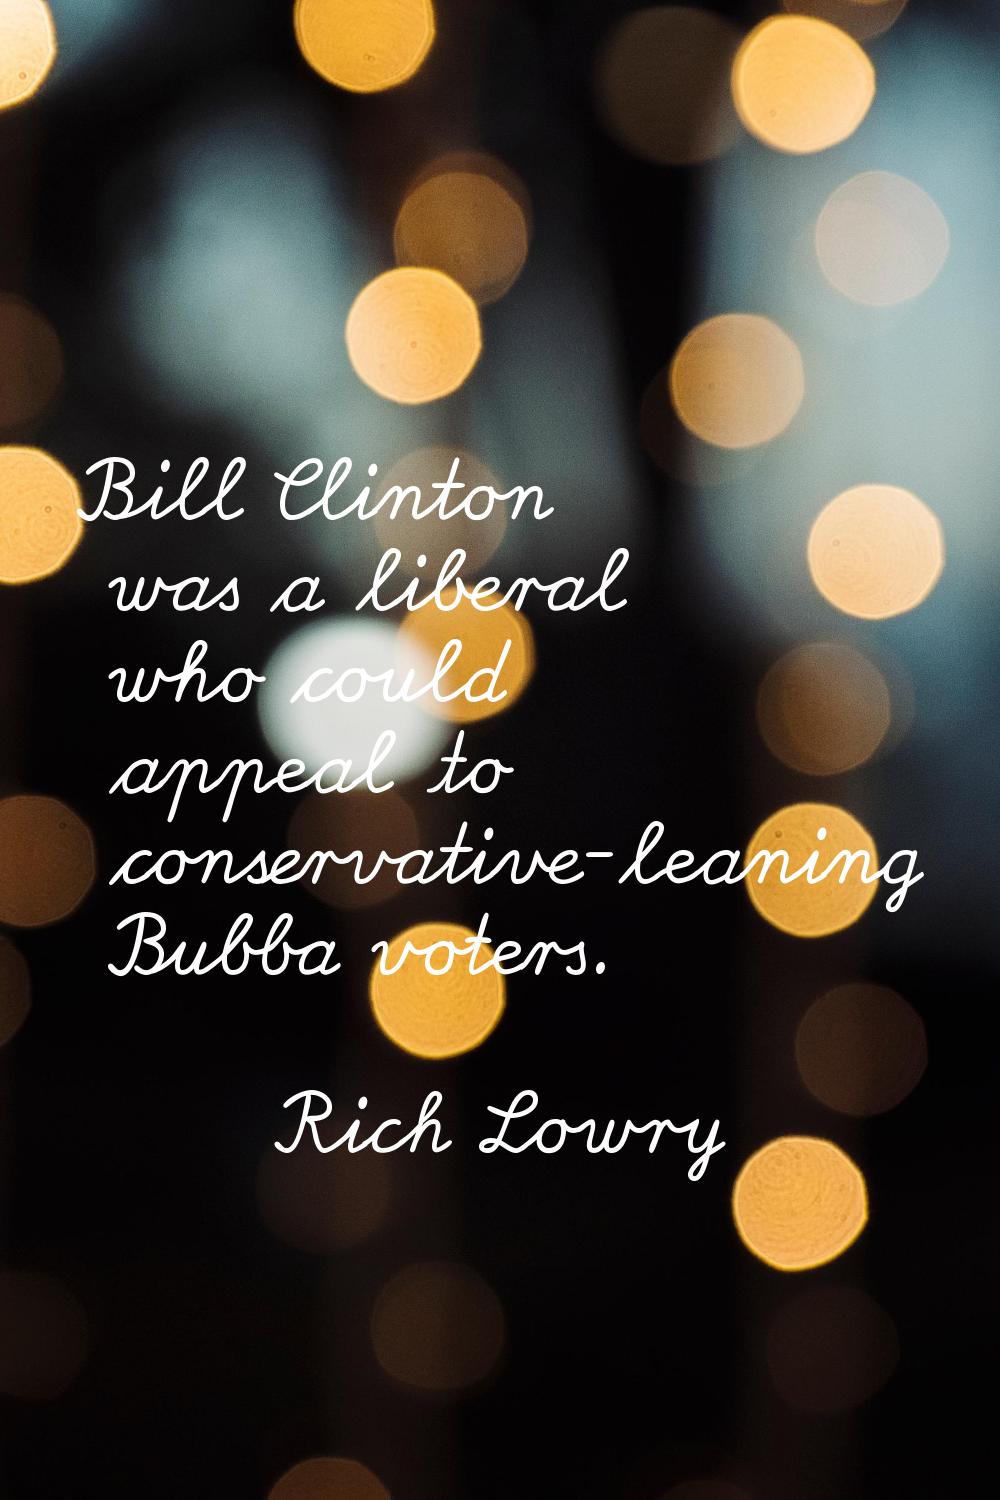 Bill Clinton was a liberal who could appeal to conservative-leaning Bubba voters.